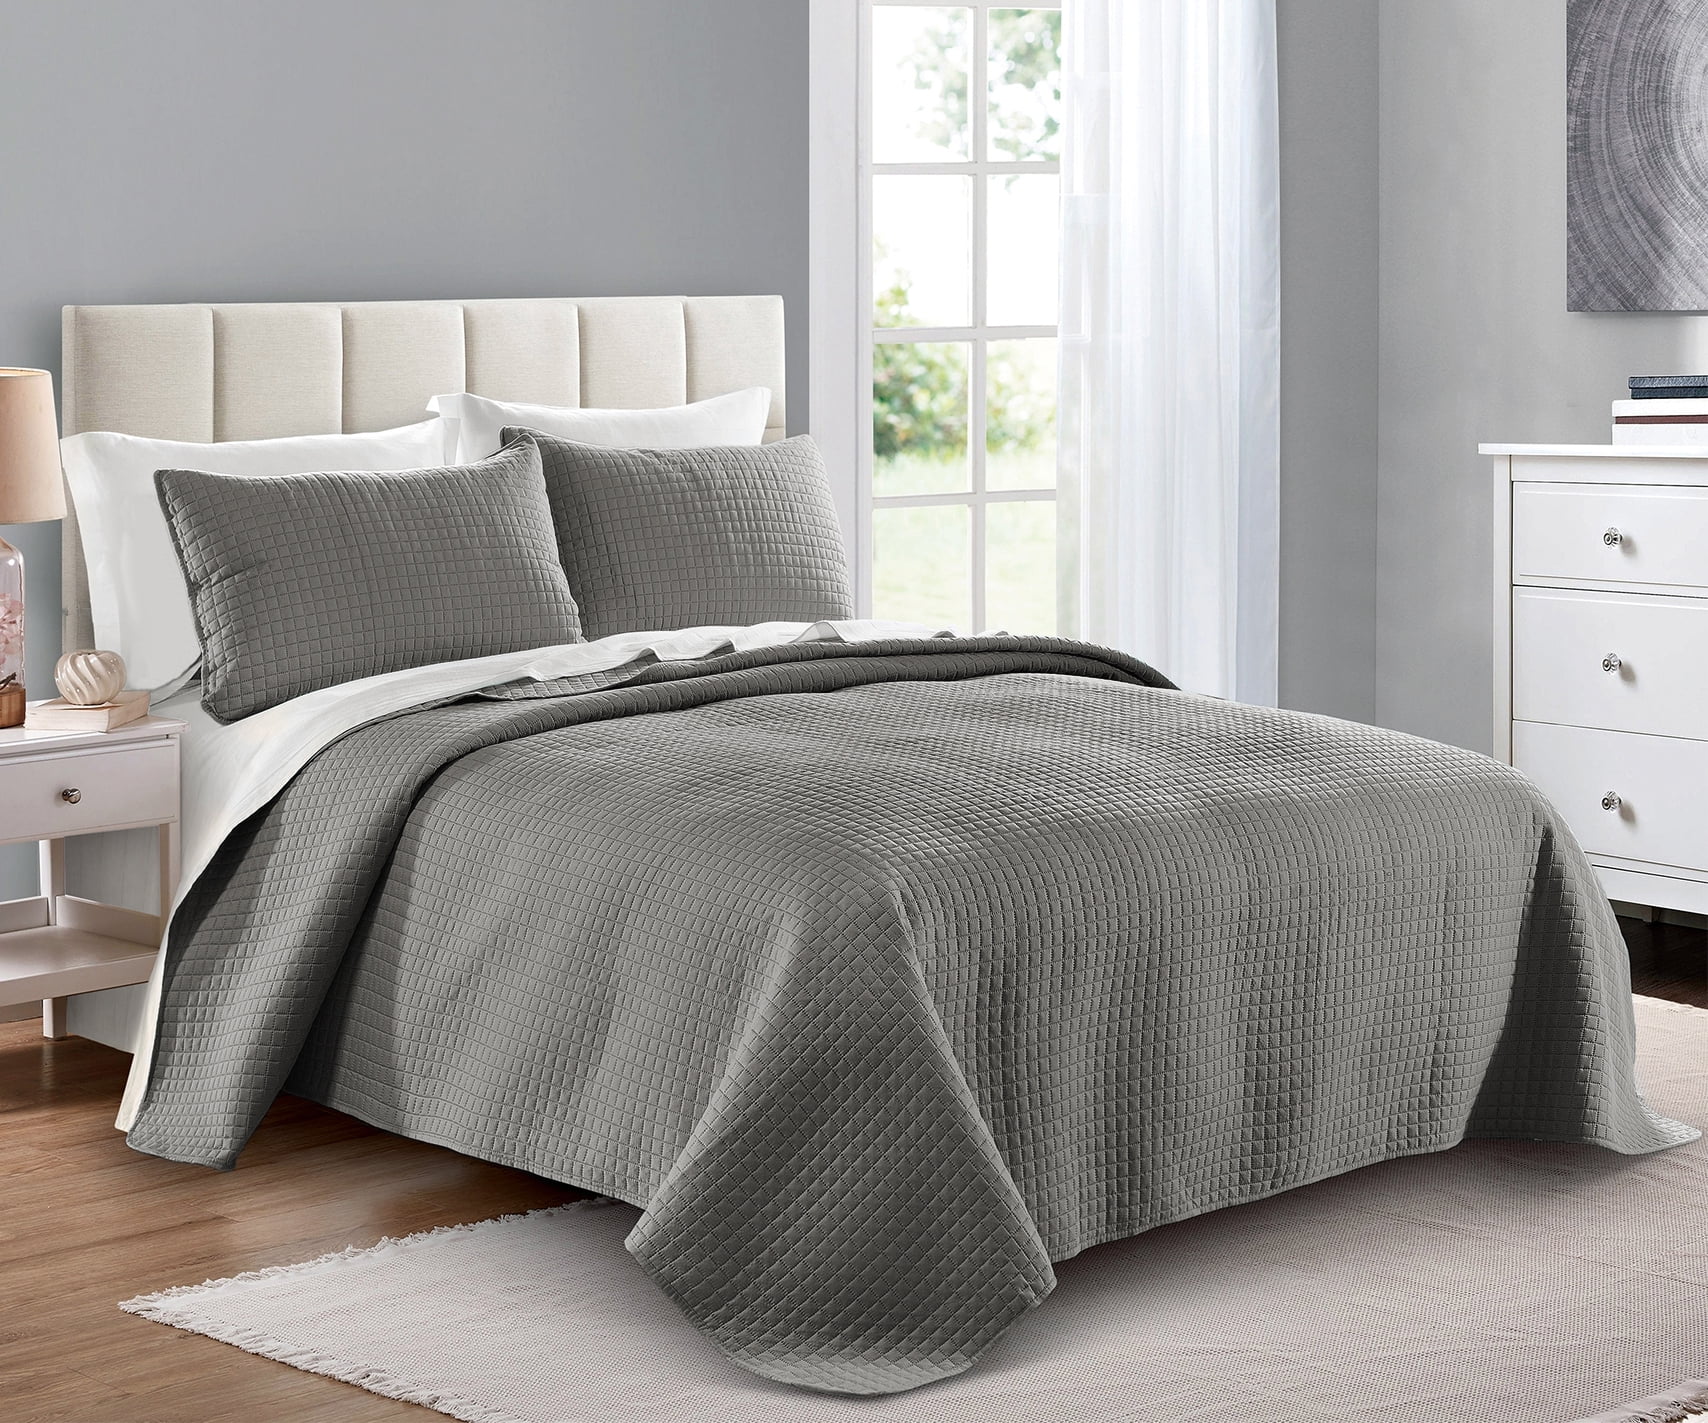 Oversized Bedspread 3 Piece Includes 1 Quilt and 2 Shams Quilt Set King/Cal King/California King Size Dark Grey Geometric Pattern Soft Microfiber Lightweight Coverlet for All Season